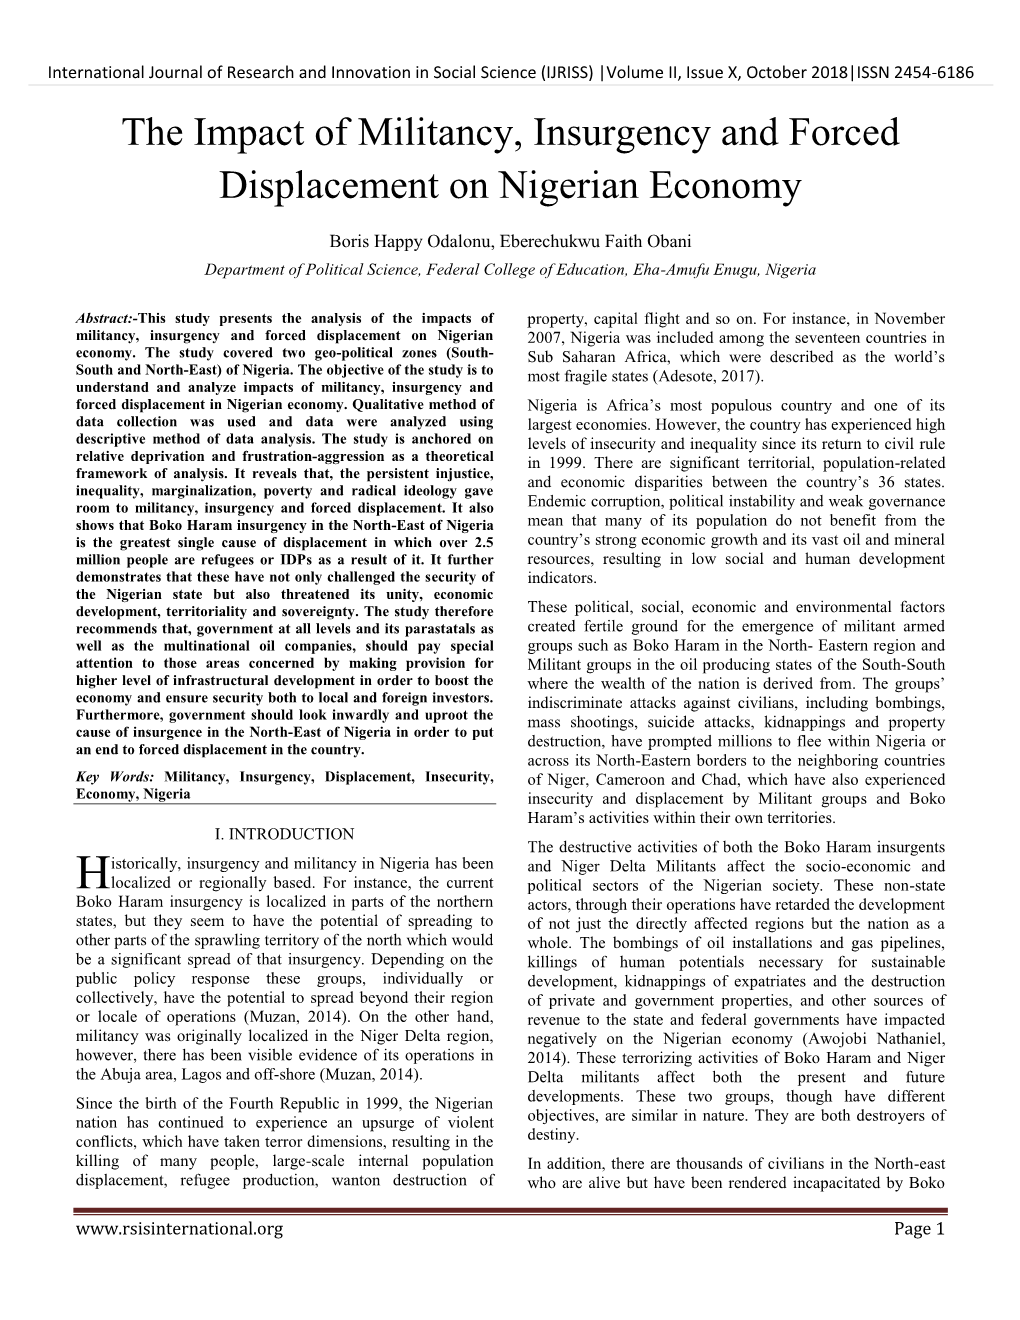 The Impact of Militancy, Insurgency and Forced Displacement on Nigerian Economy